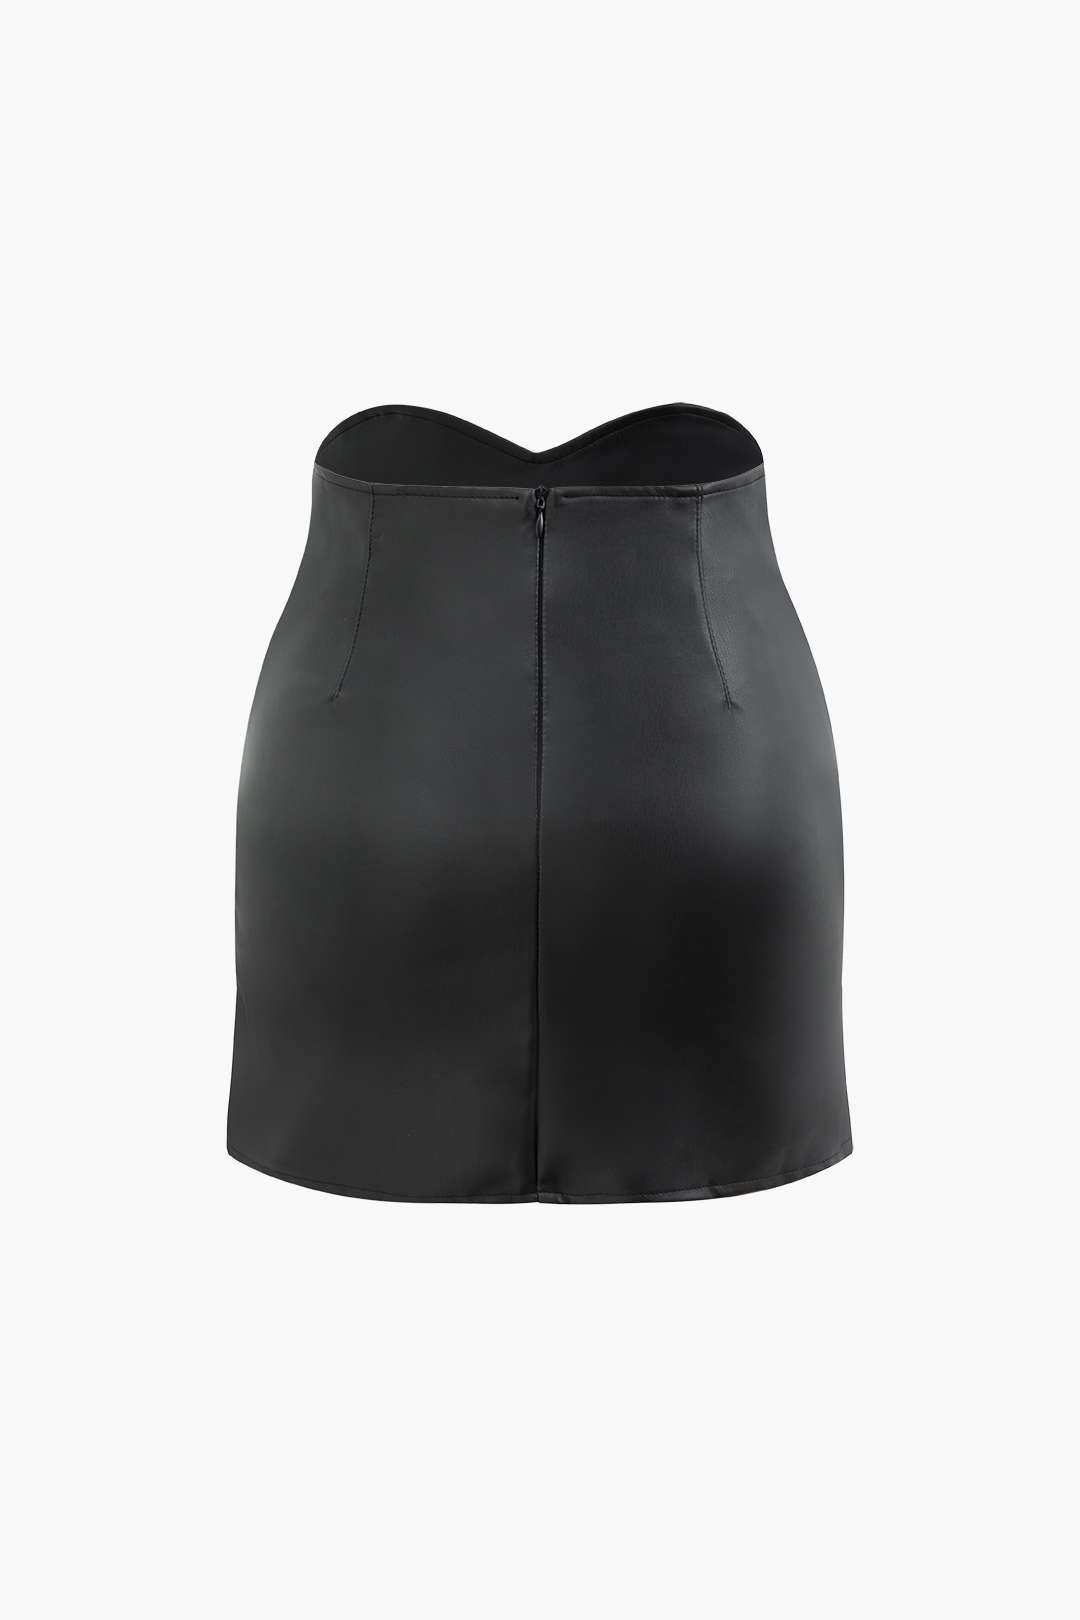 High Waist Faux Leather Ruched Mini Skirt